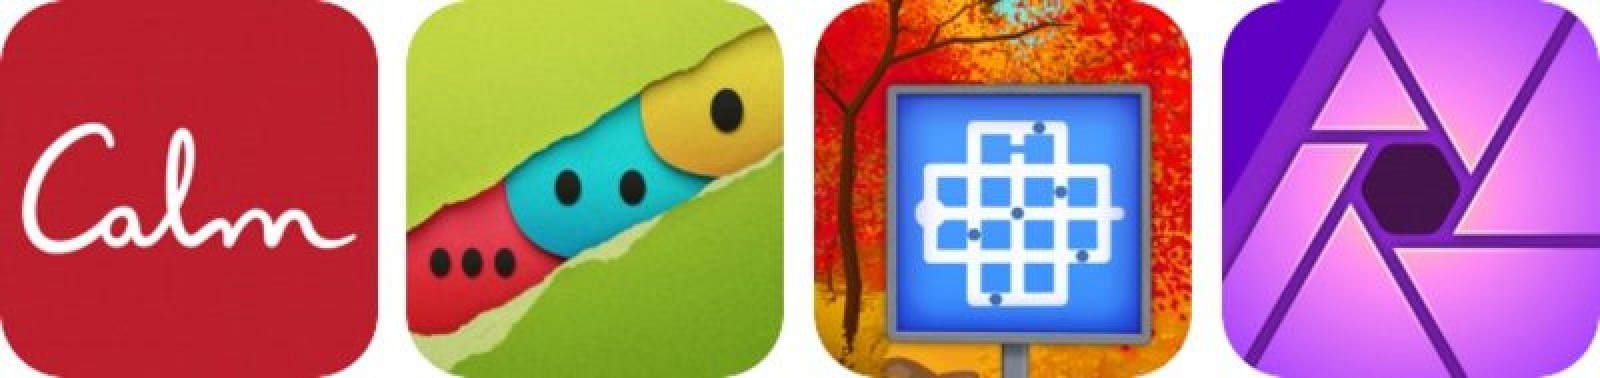 photo of Apple's Best of the App Store in 2017: Calm, Splitter Critters, Affinity Photo and The Witness image